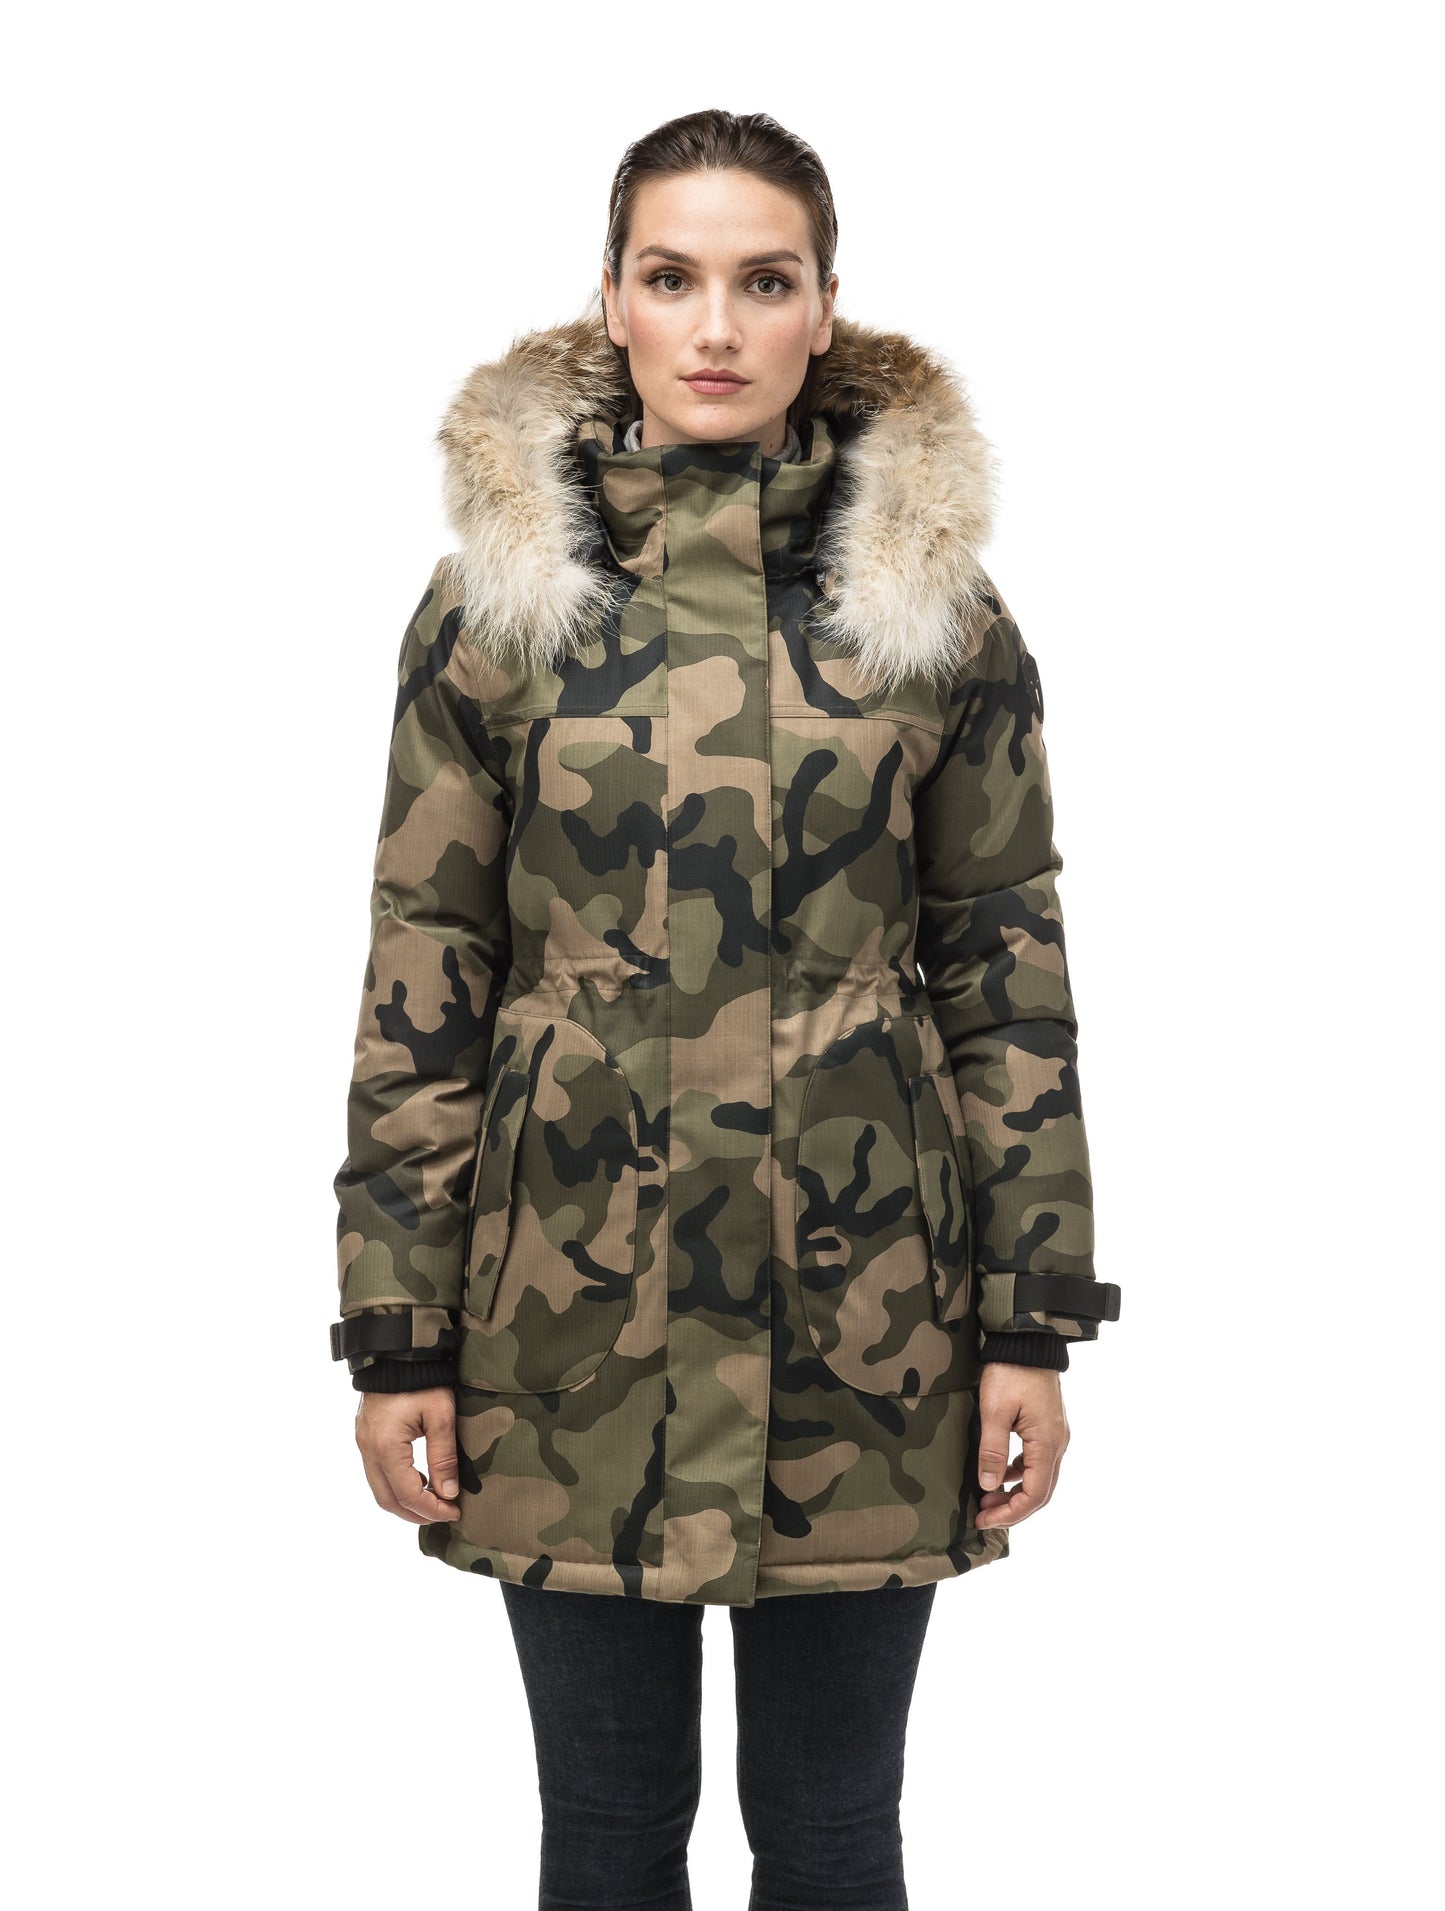 Thigh length women's down filled parka with side entry pockets and drawcord waist, removable hood and fur trim in Camo